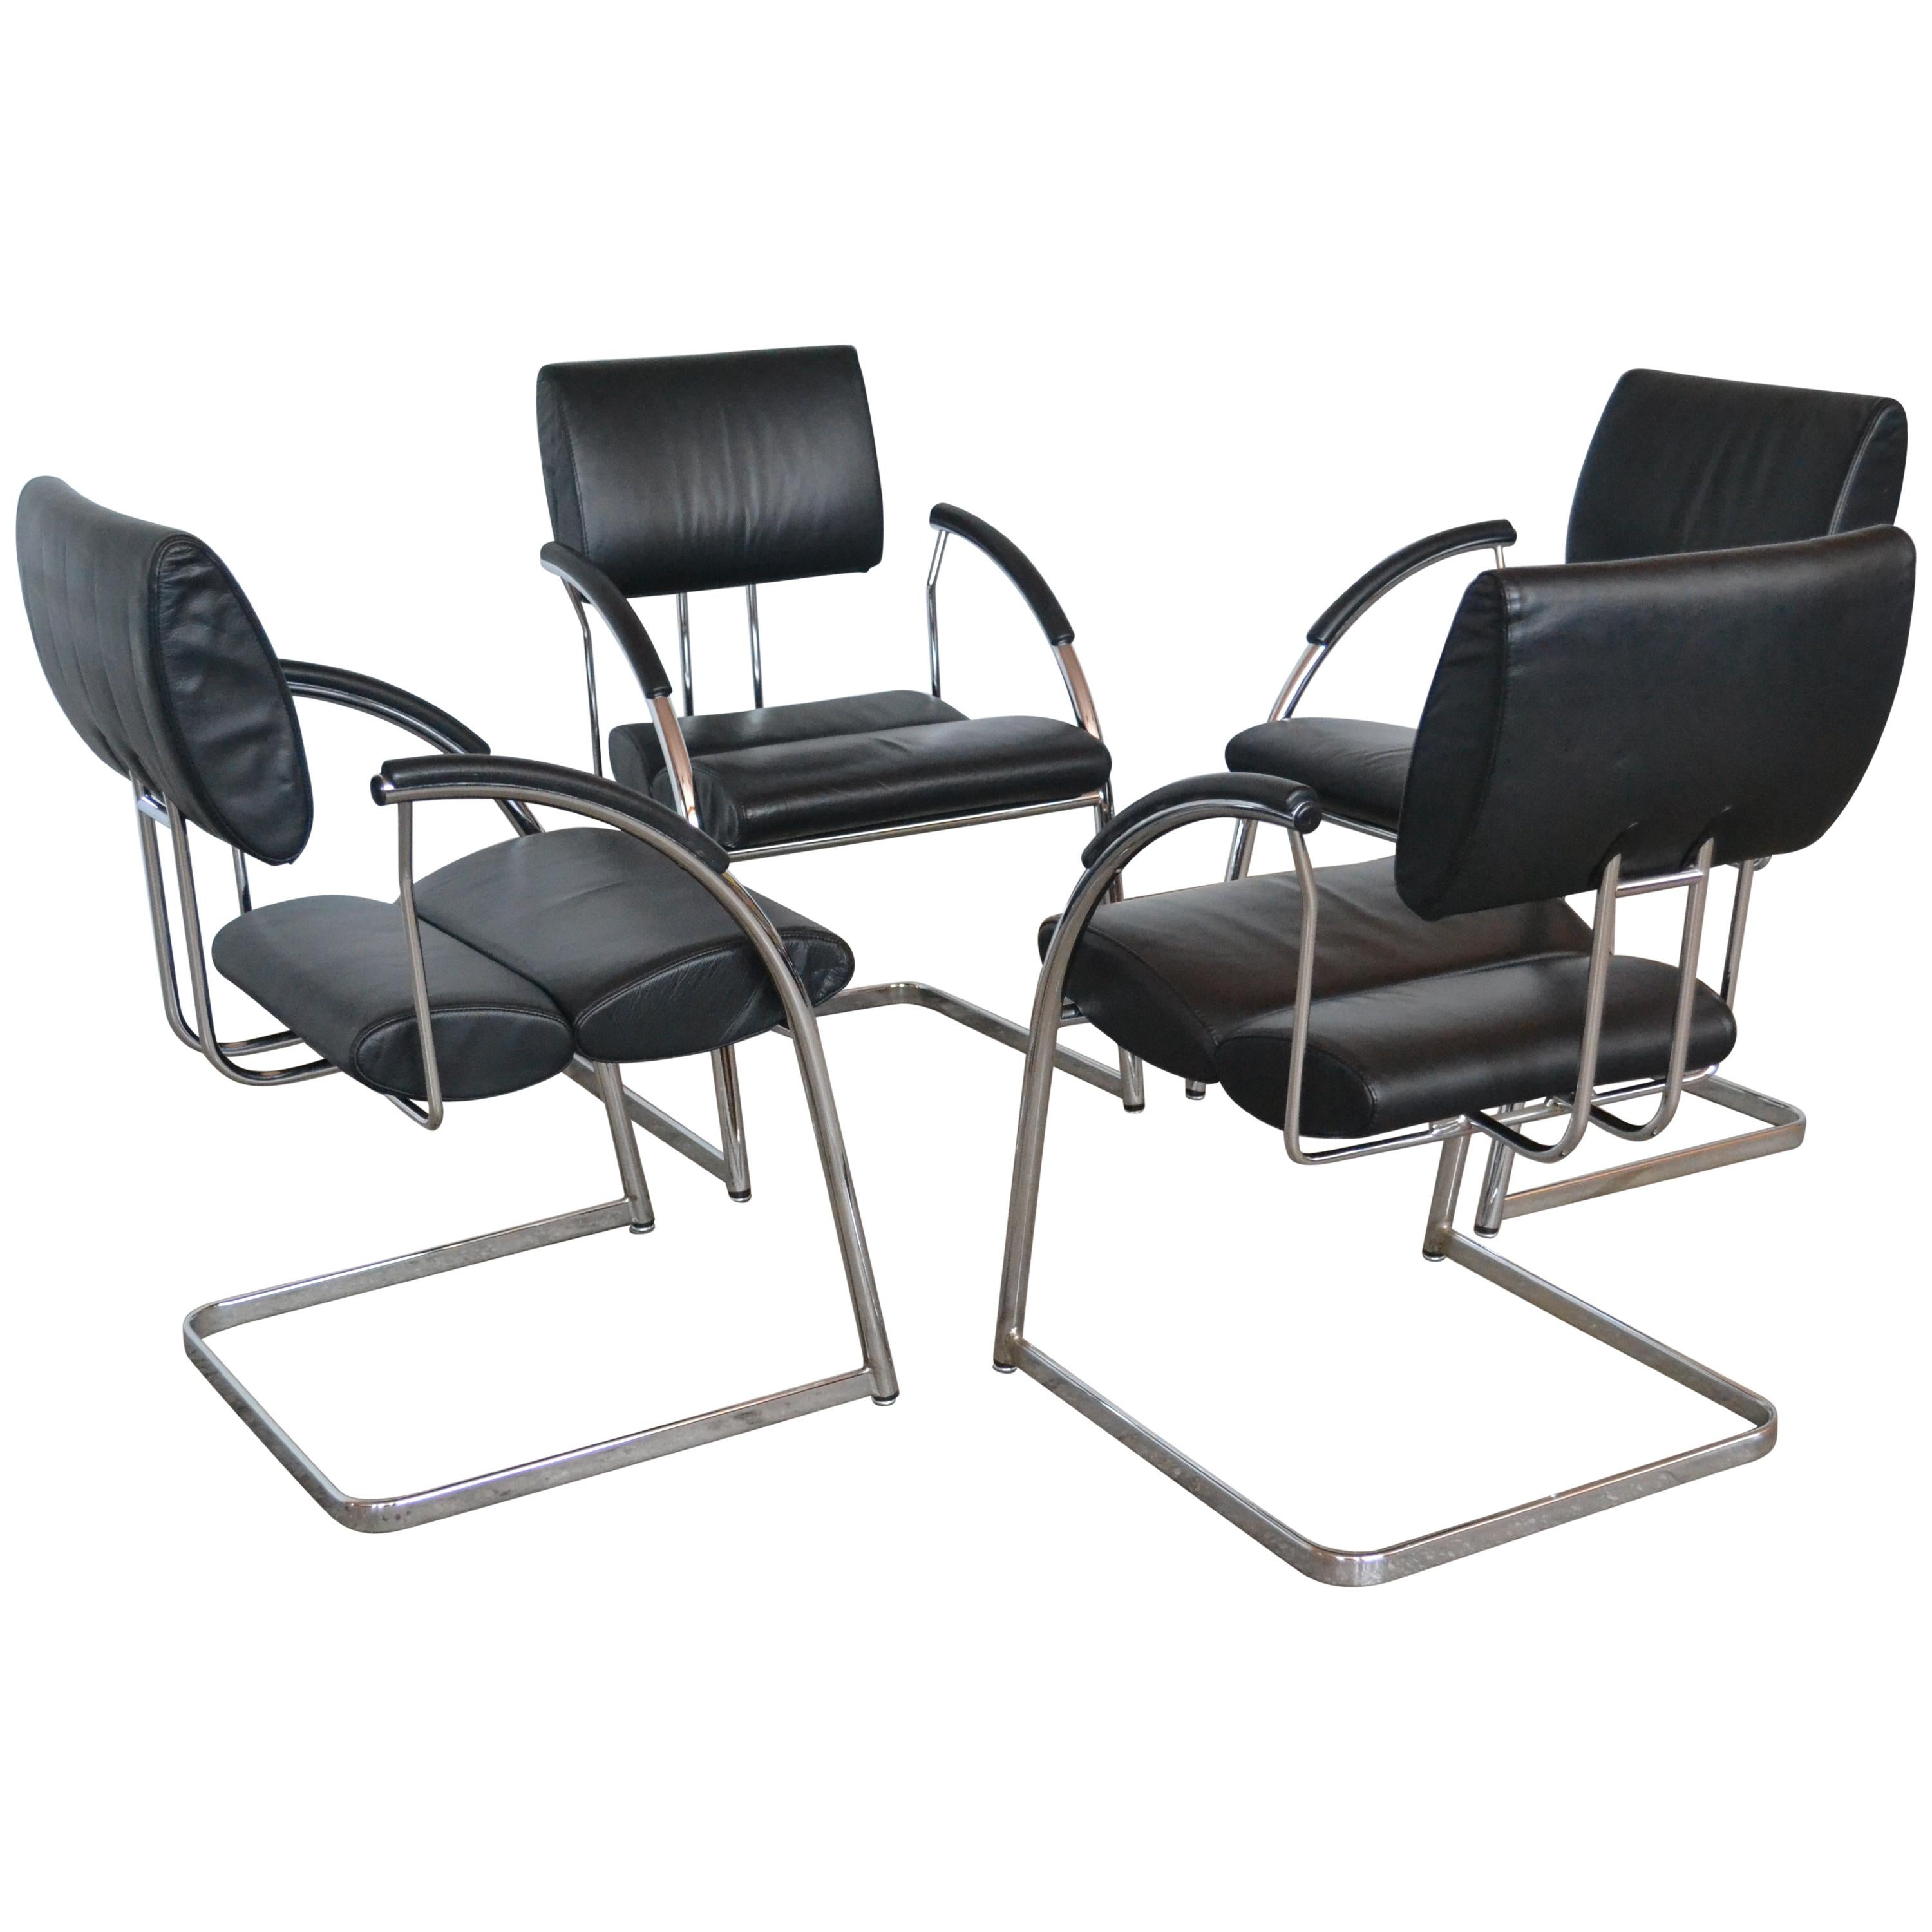 Set of Four Chairs Martin Stoll, 1990s For Sale